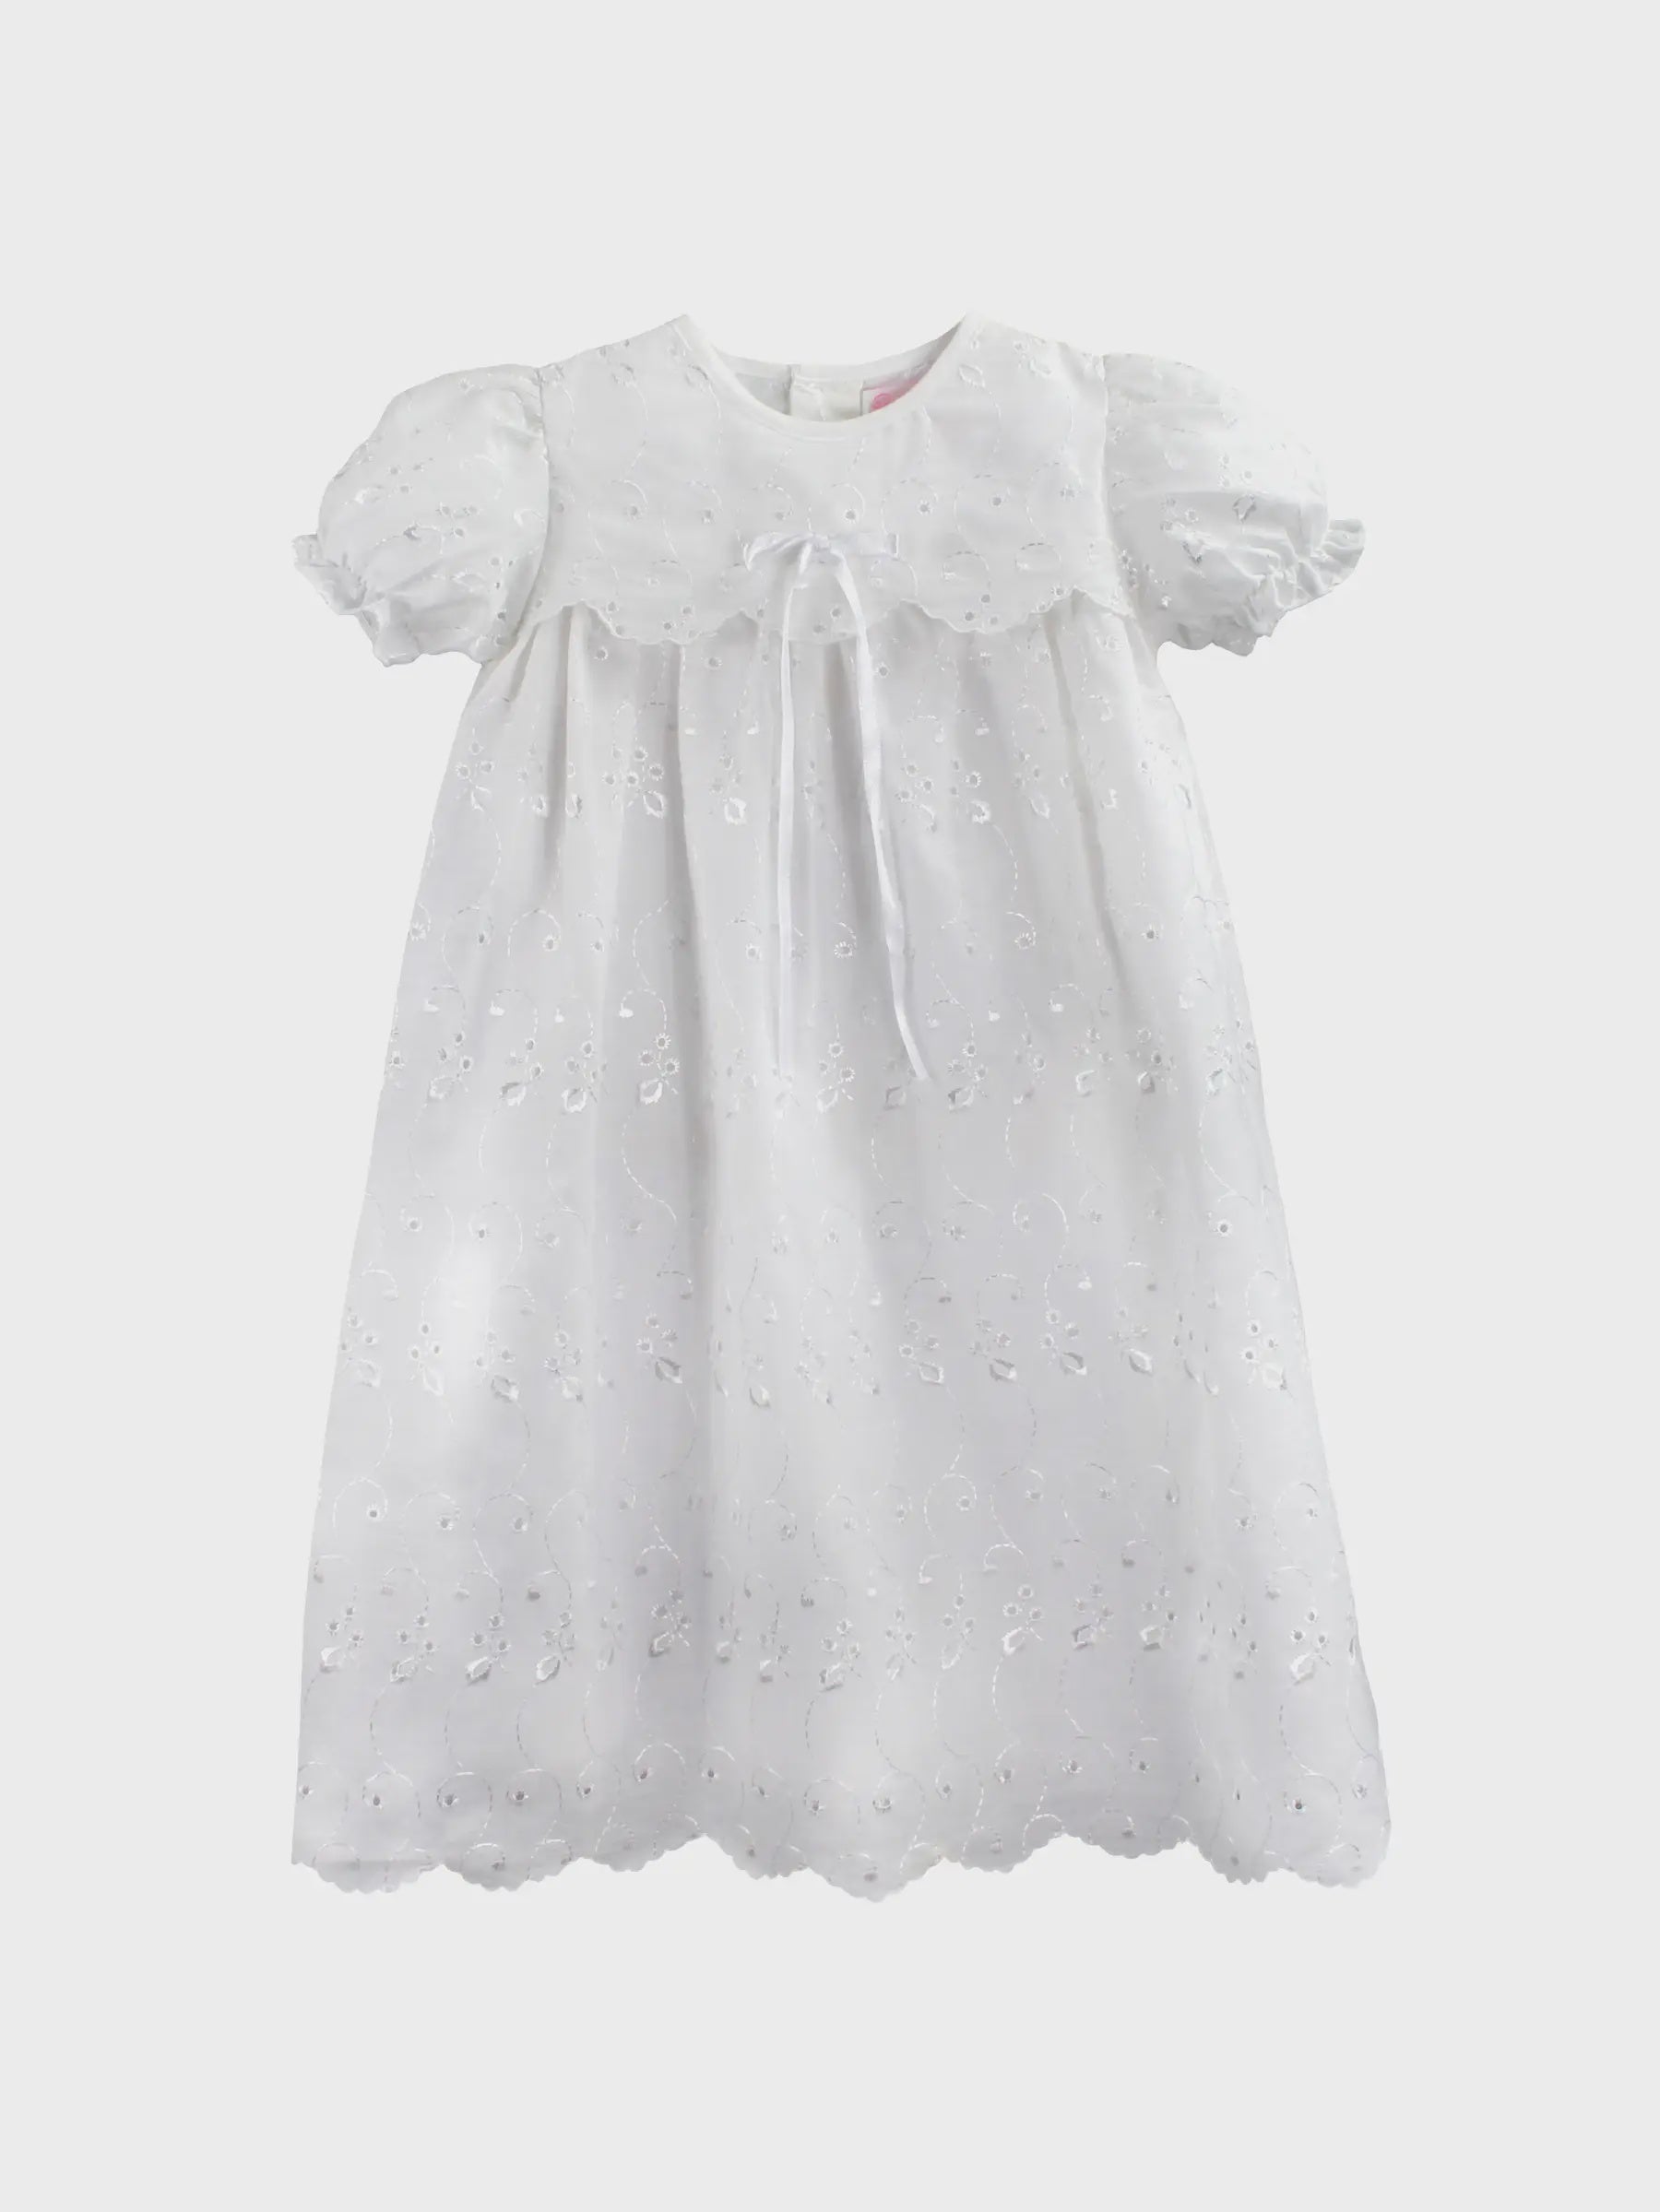 Eyelet Lace Christening Gown